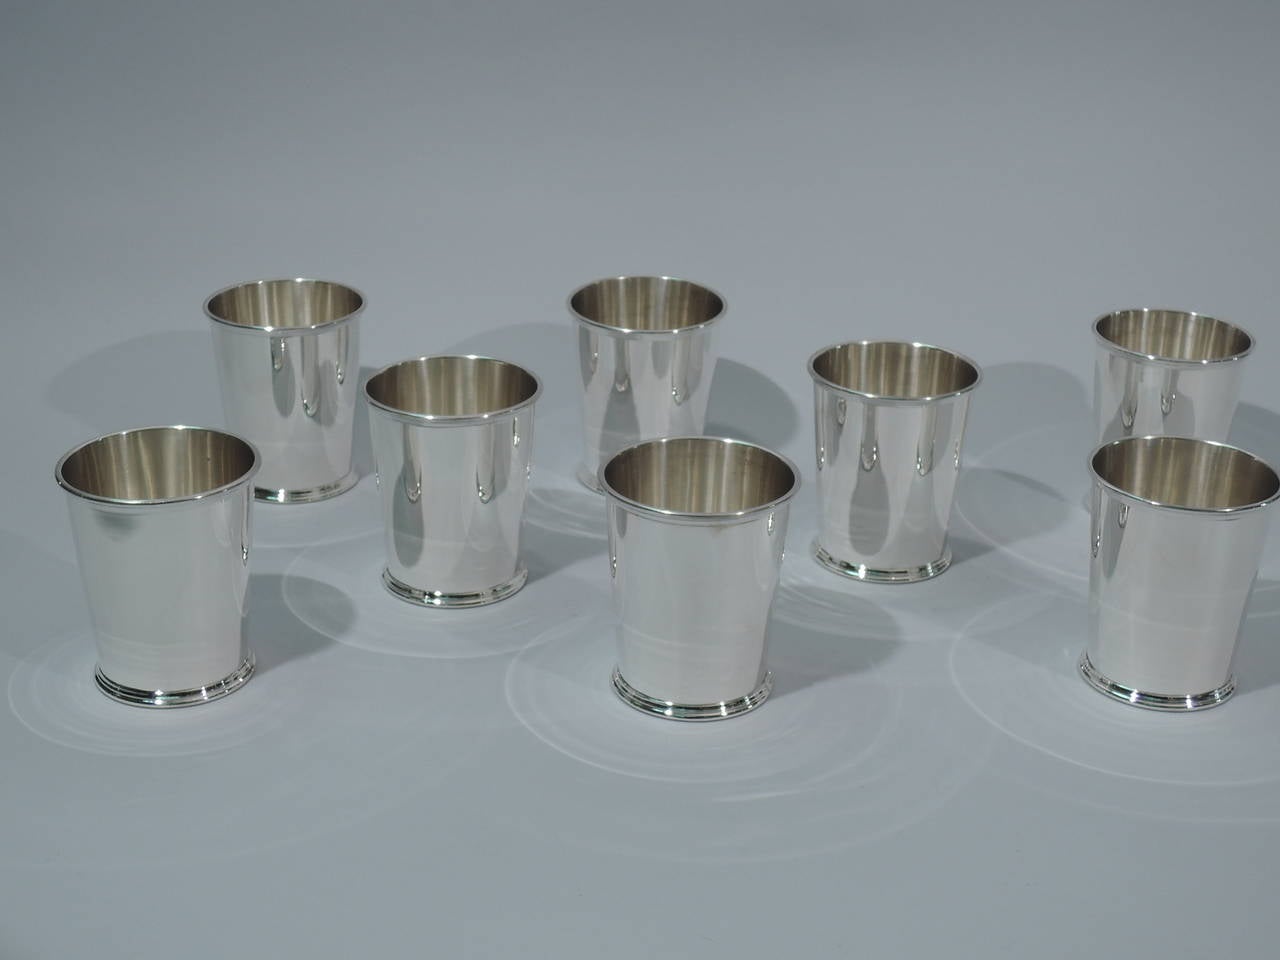 Set of eight sterling silver mint juleps. Made by S. Kirk & Sons in Baltimore, ca 1950. Each: straight and tapering sides, reeded rim, and spread and reeded foot. Hallmarked. Excellent condition. 

Dimensions: H 3 3/4 x D 3 1/4 in. Total weight: